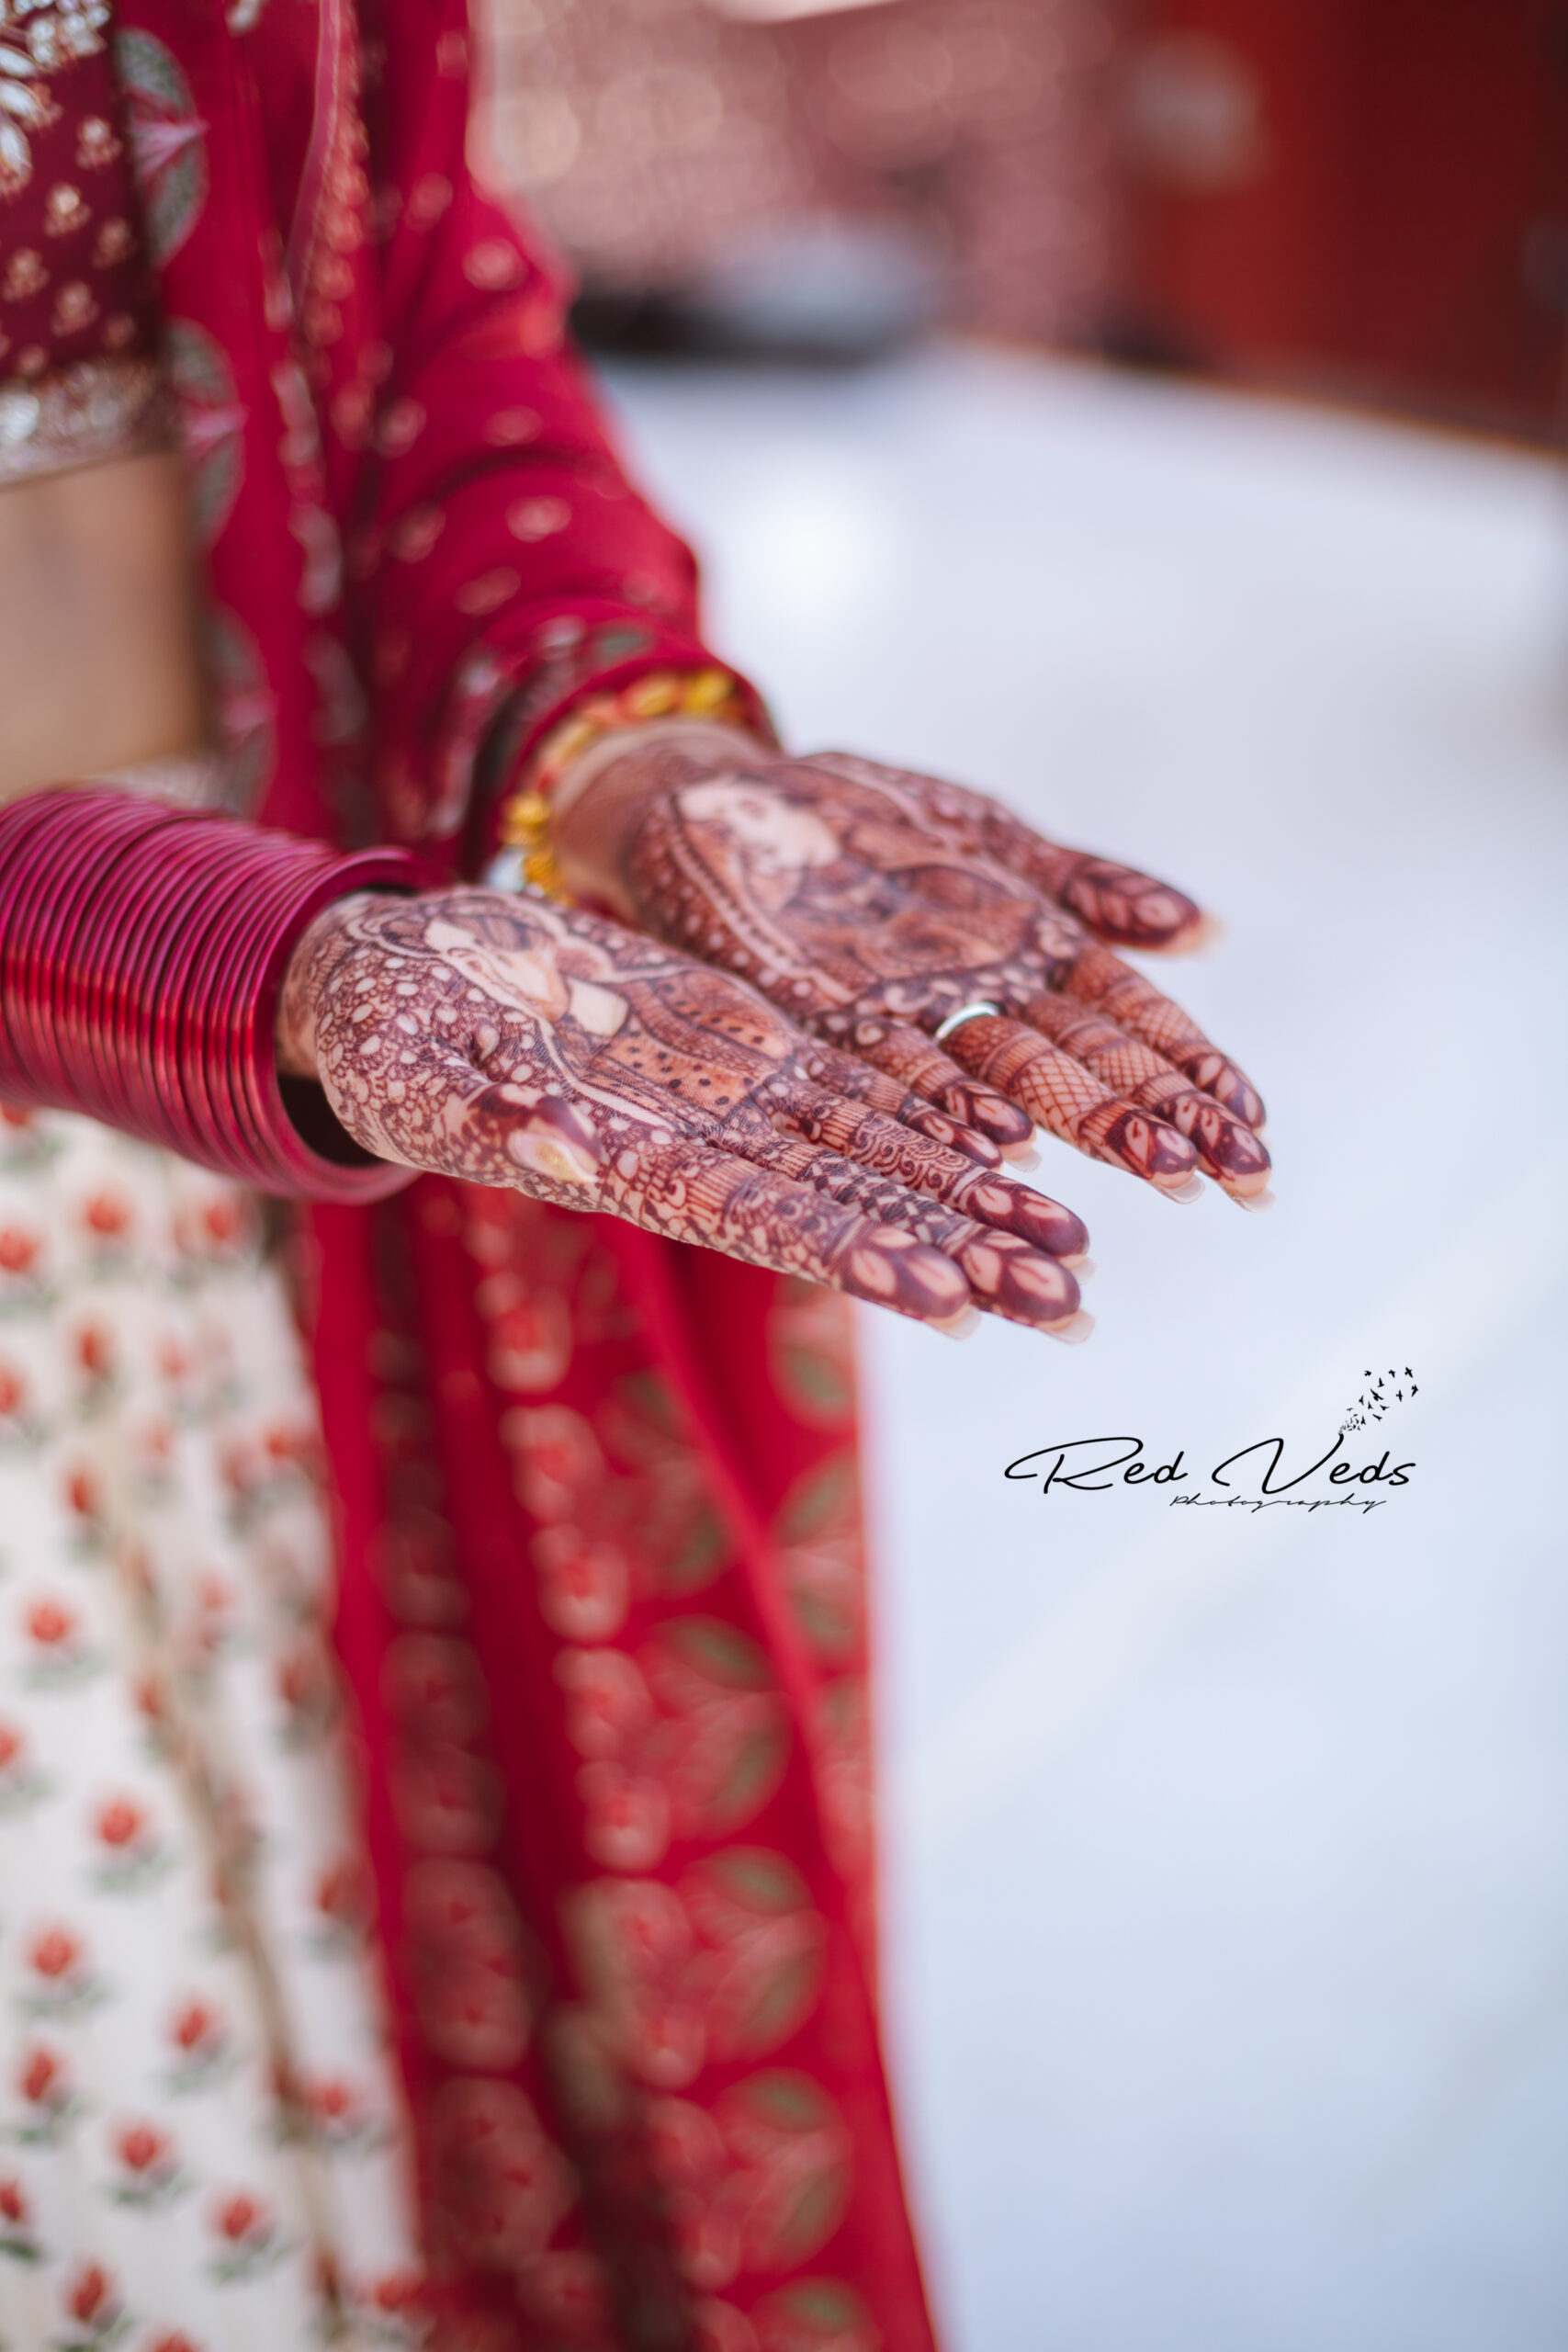 Tips On How To Flaunt Your Bridal Mehendi Pictures | Bridal photography  poses, Indian bride photography poses, Wedding couple poses photography